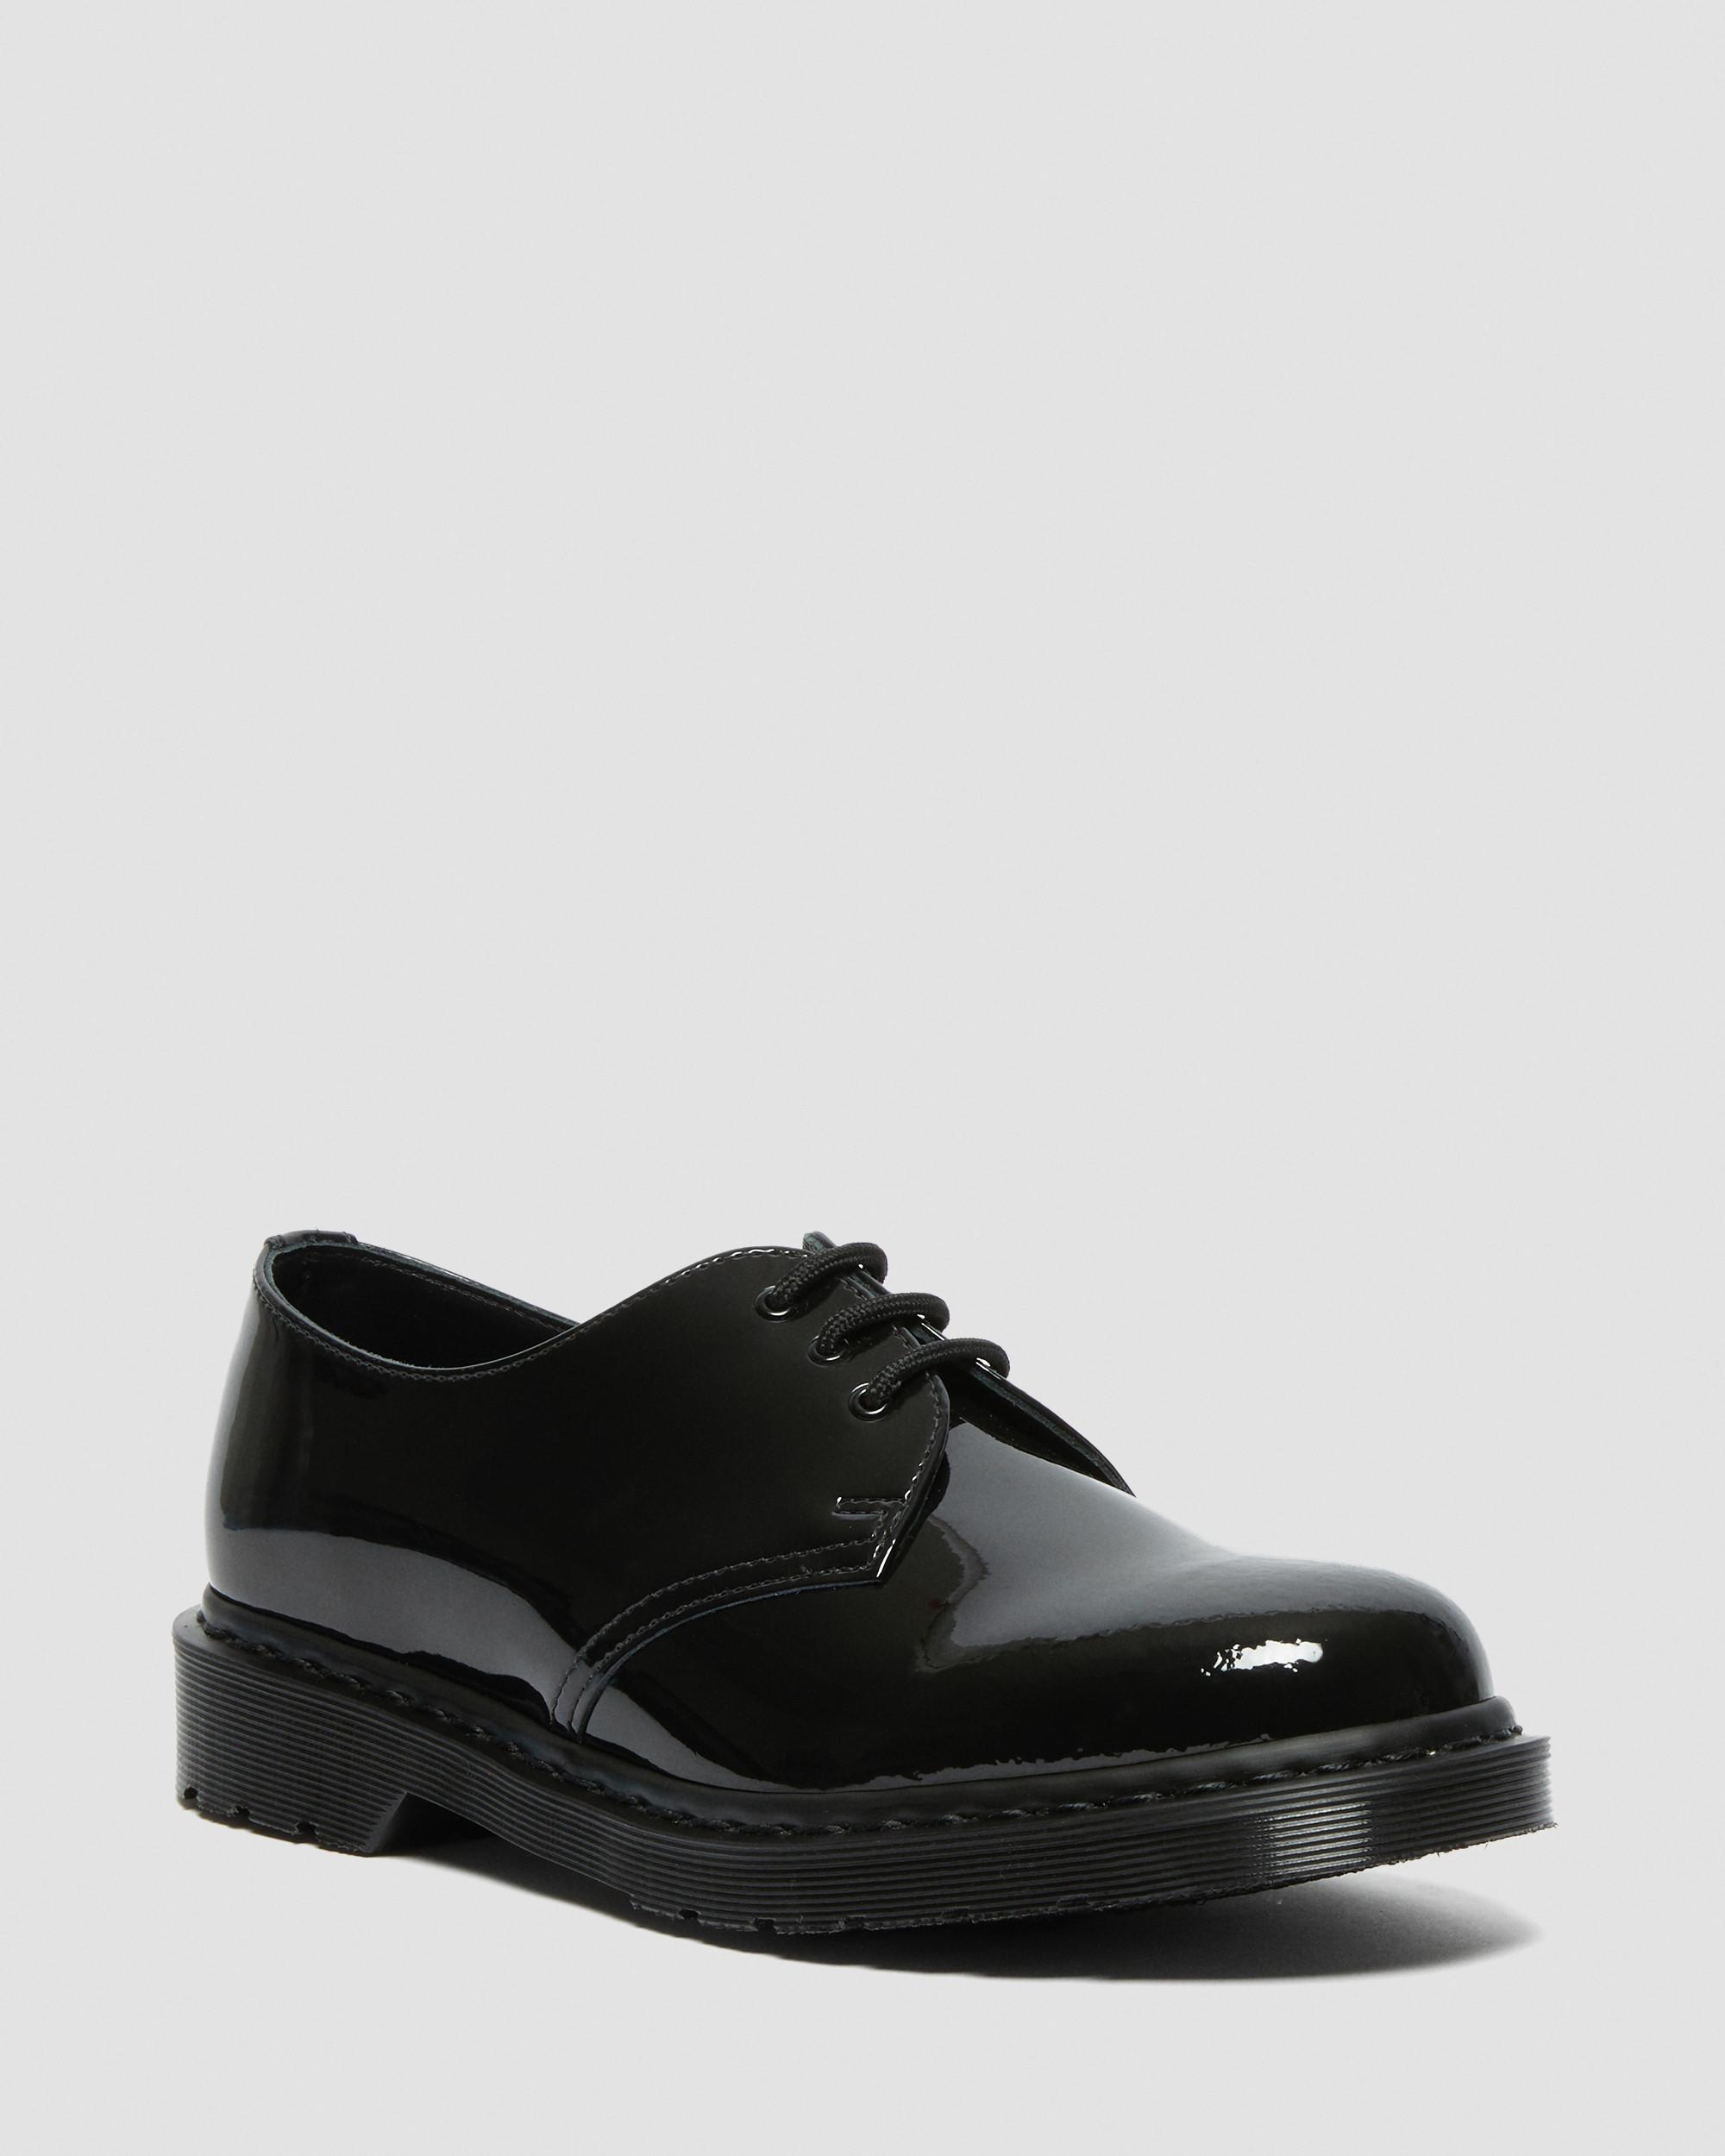 1461 Made in England Mono Patent Leather Oxford Shoes | Dr. Martens